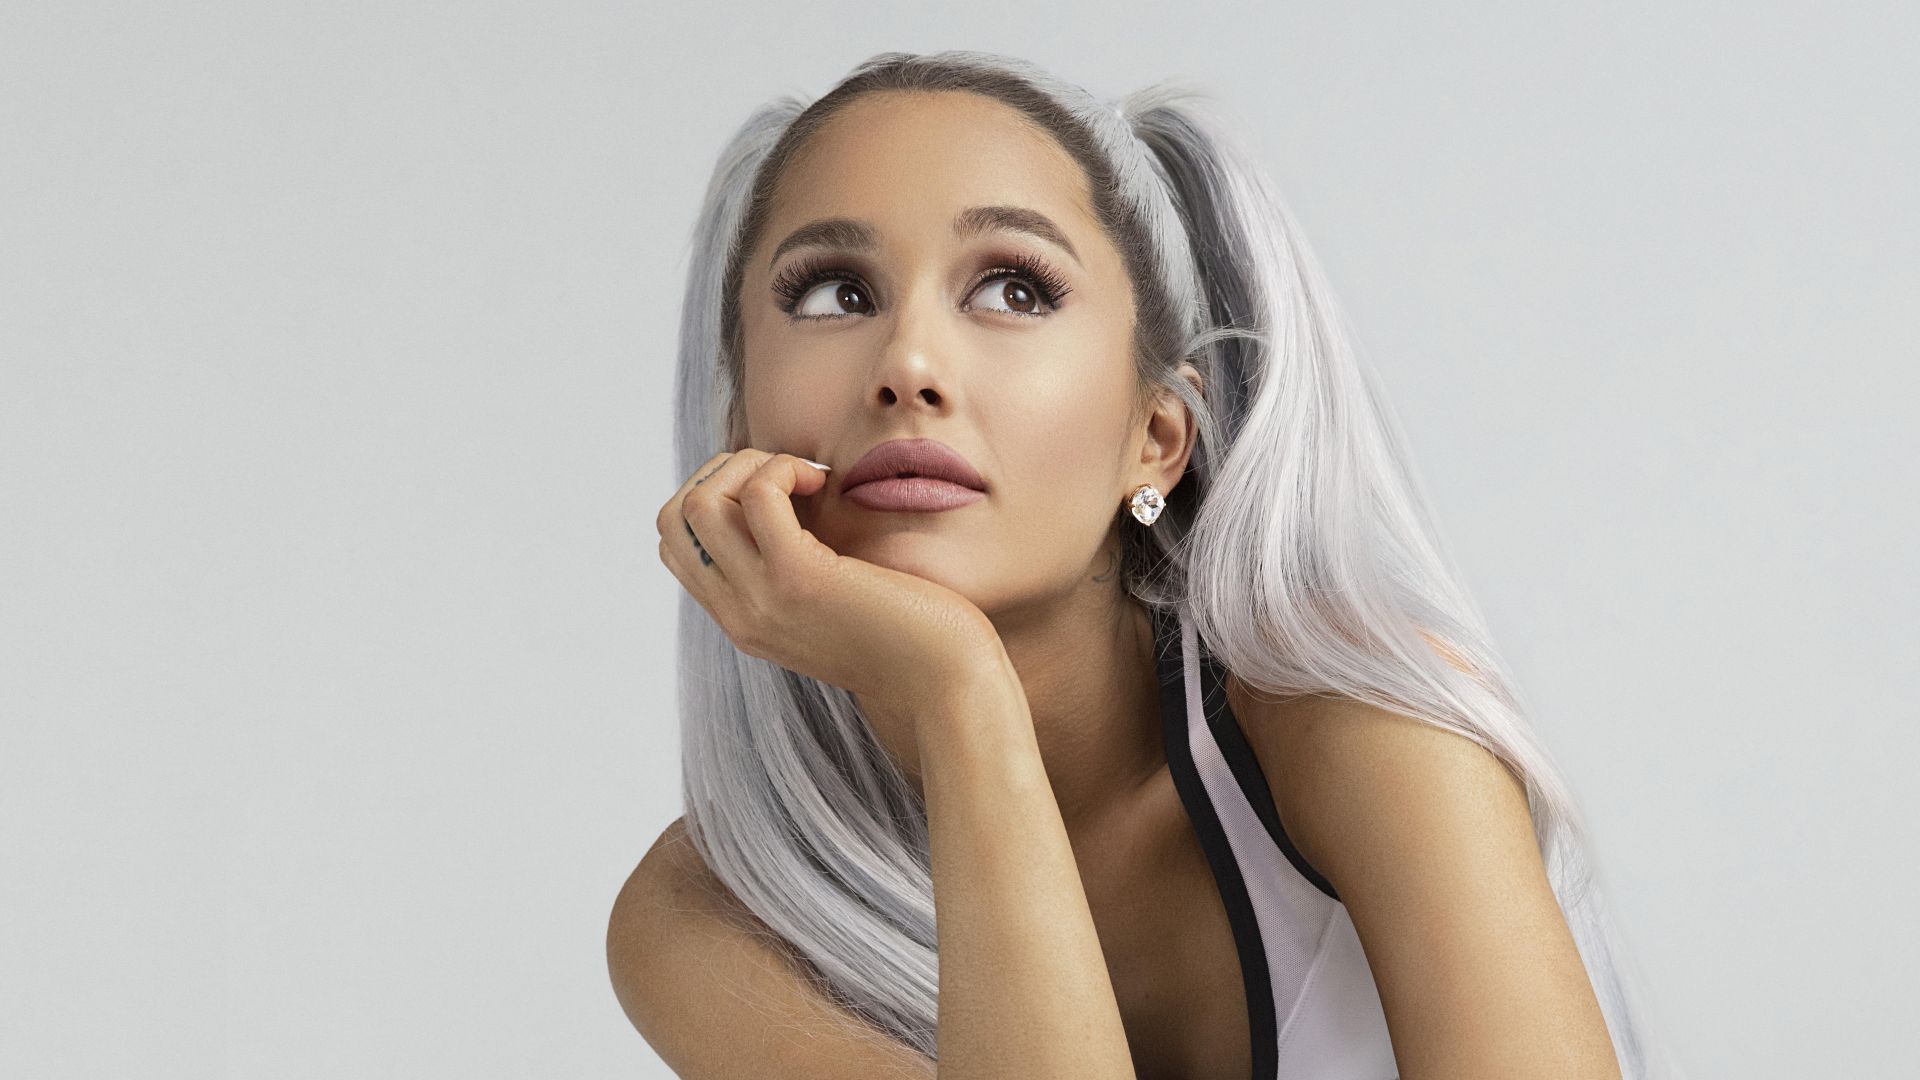 Ariana grande, white hair, celebrity wallpaper, HD image, picture, background, 9f25a7